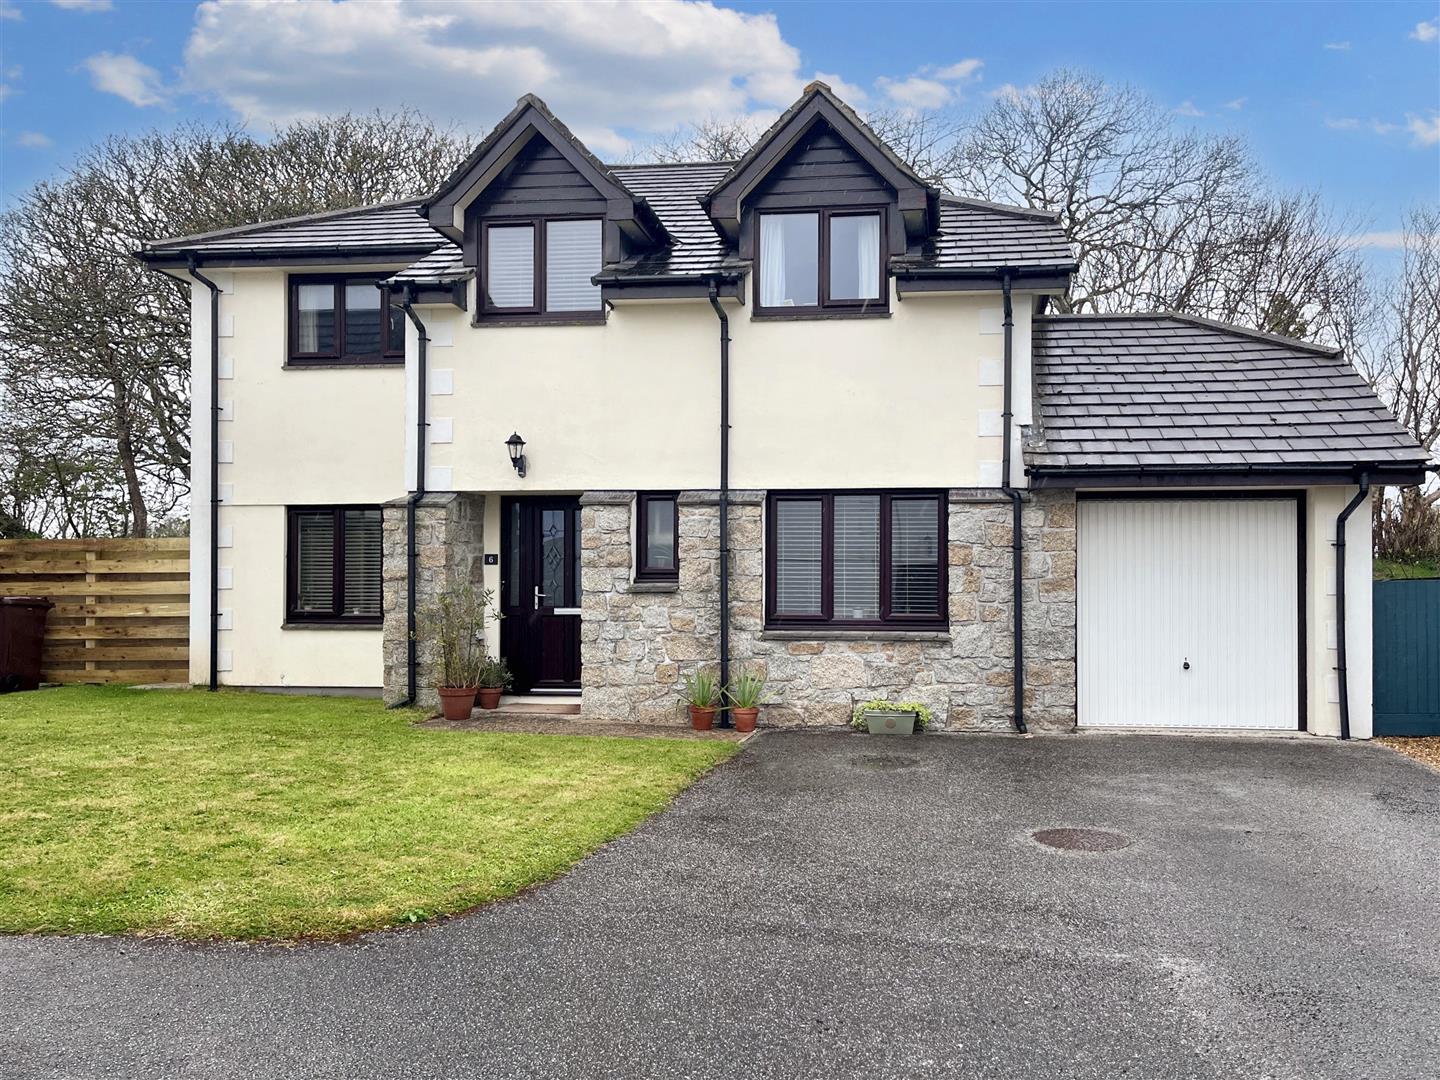 Beautifully presented detached family home